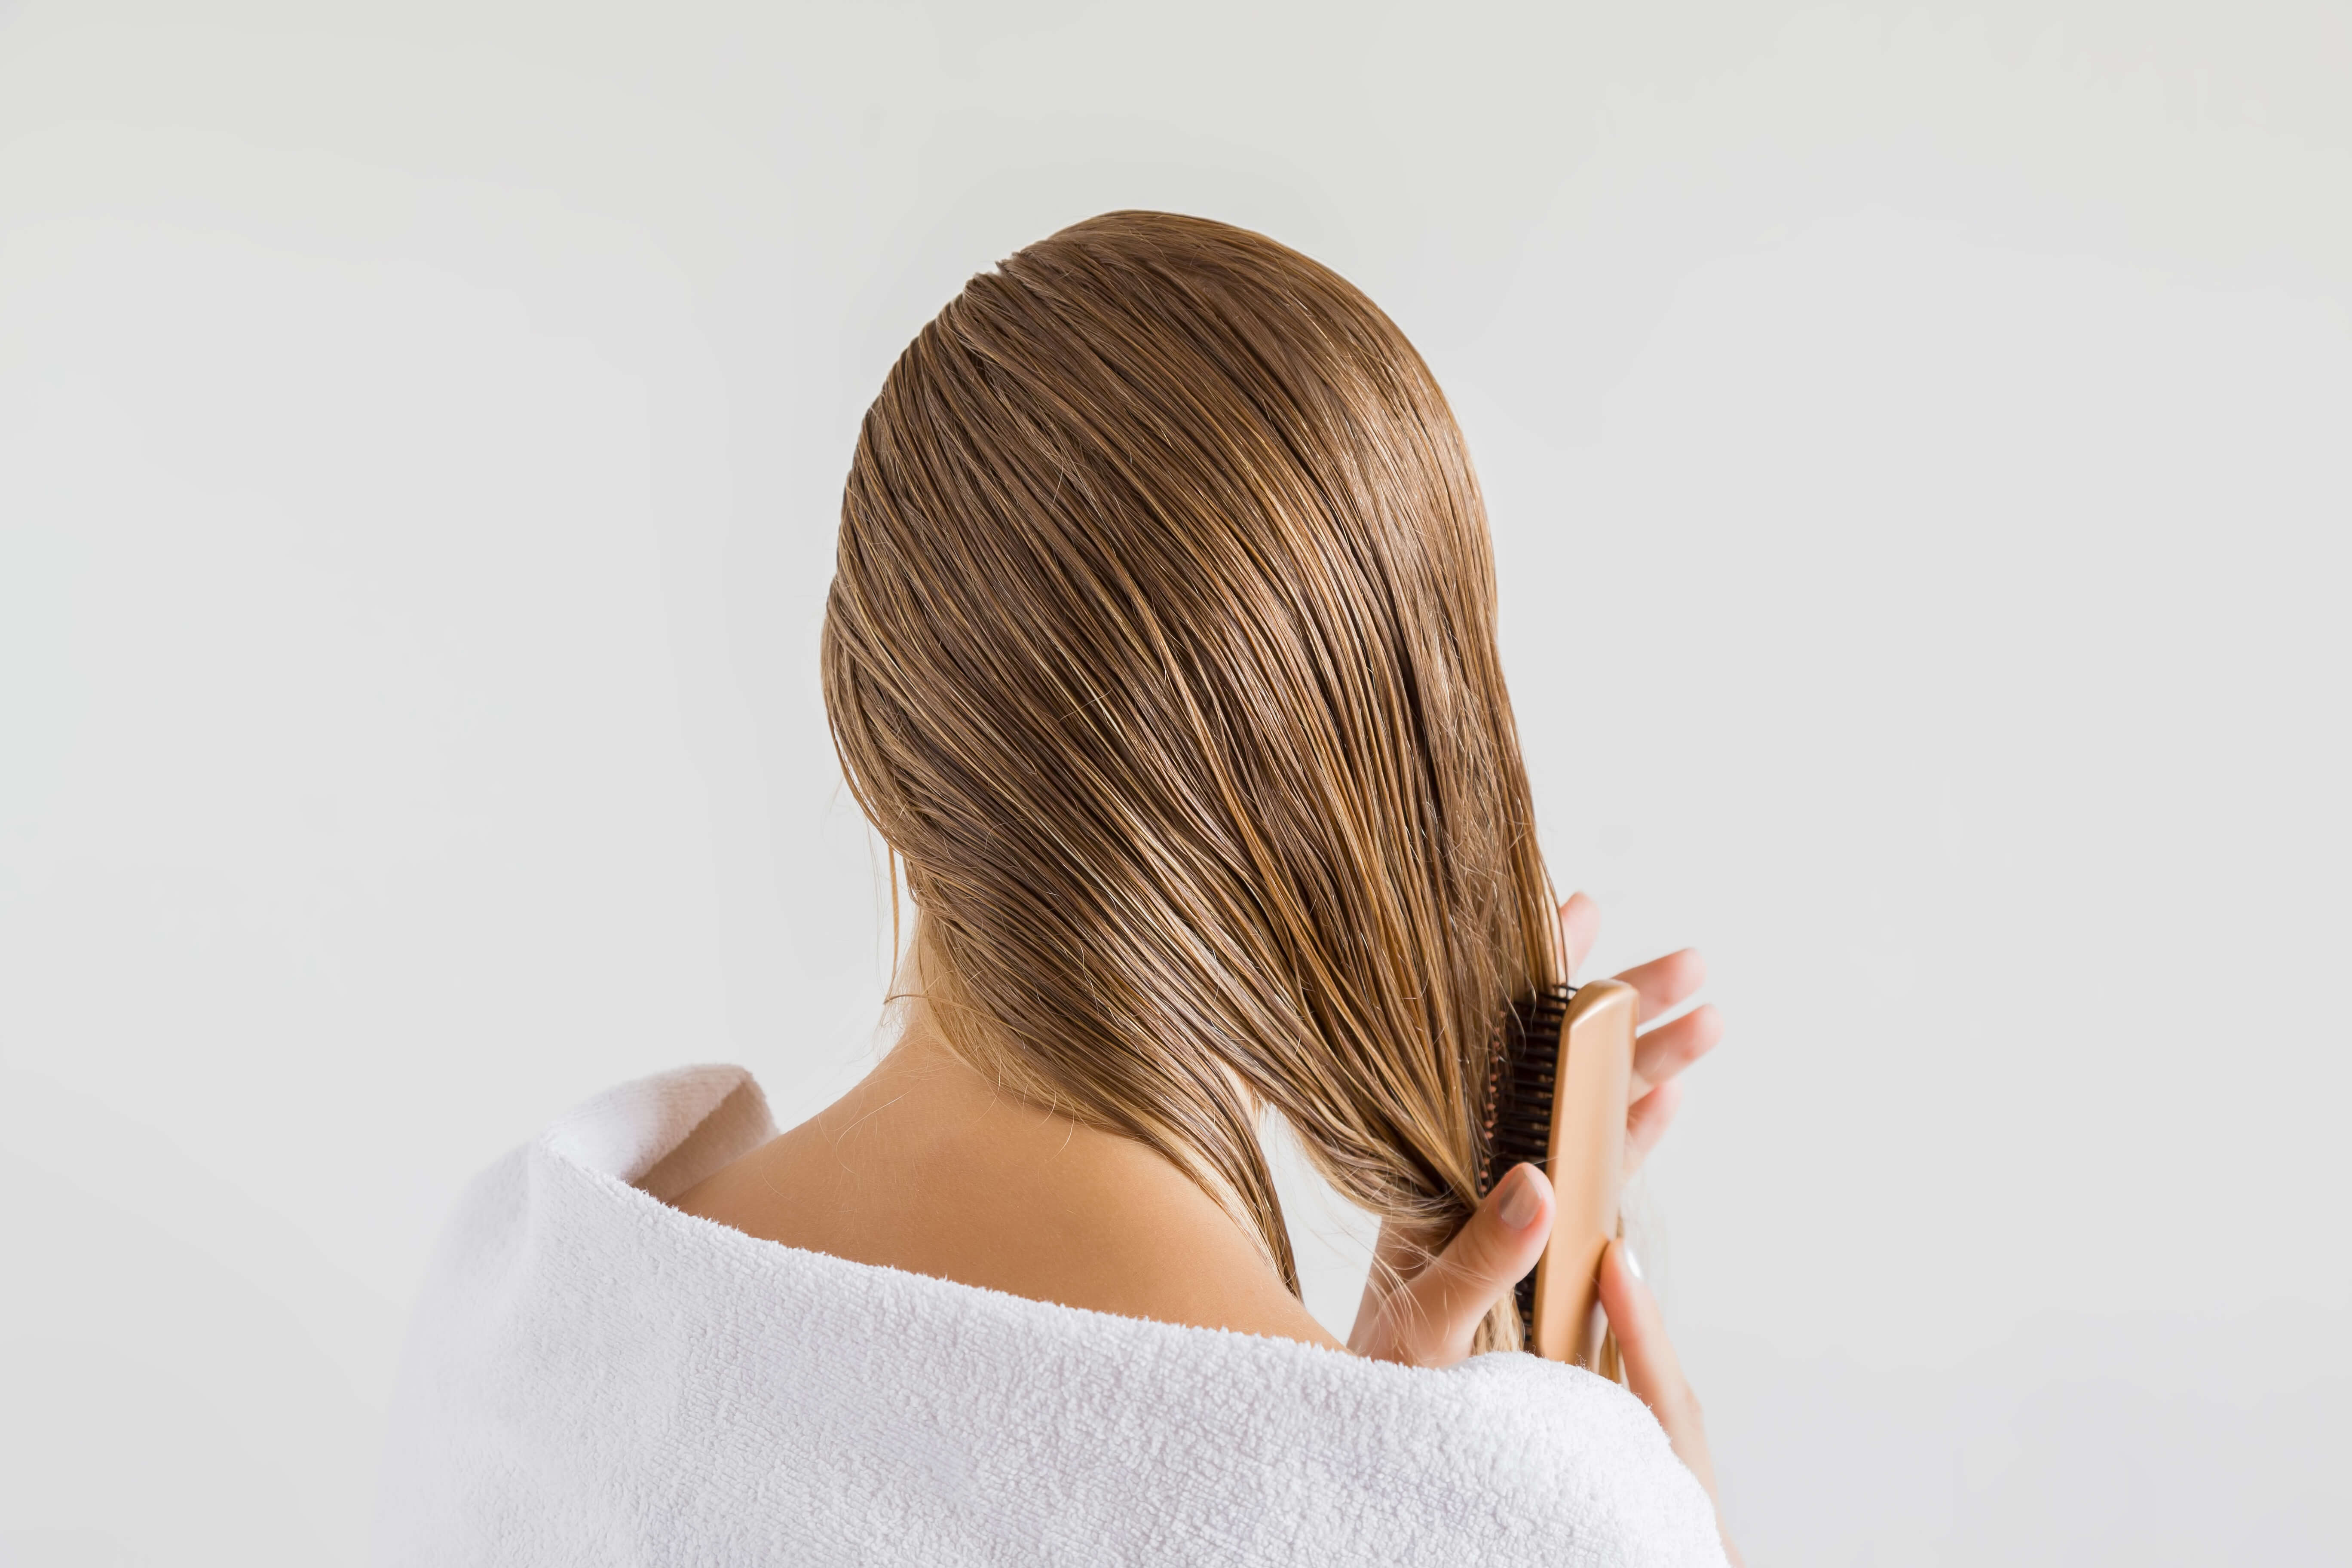 How to fight back hair loss? The first 5 steps to take now